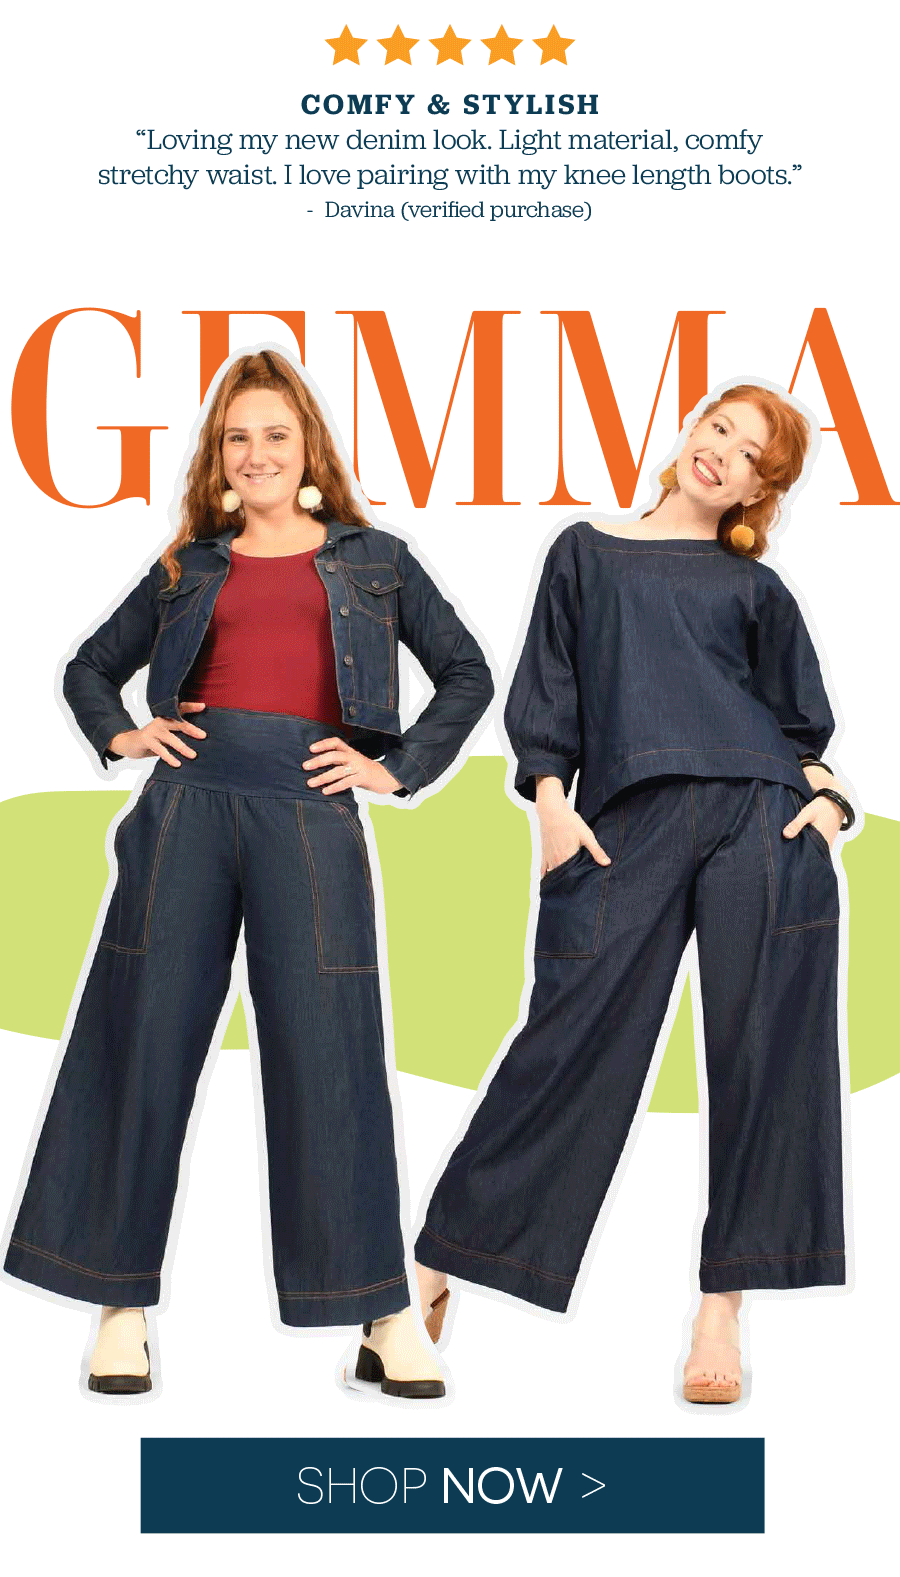 Comfy & Stylish “Loving my new denim look. Light material, comfy stretchy waist. I love pairing with my knee length boots.” gemma